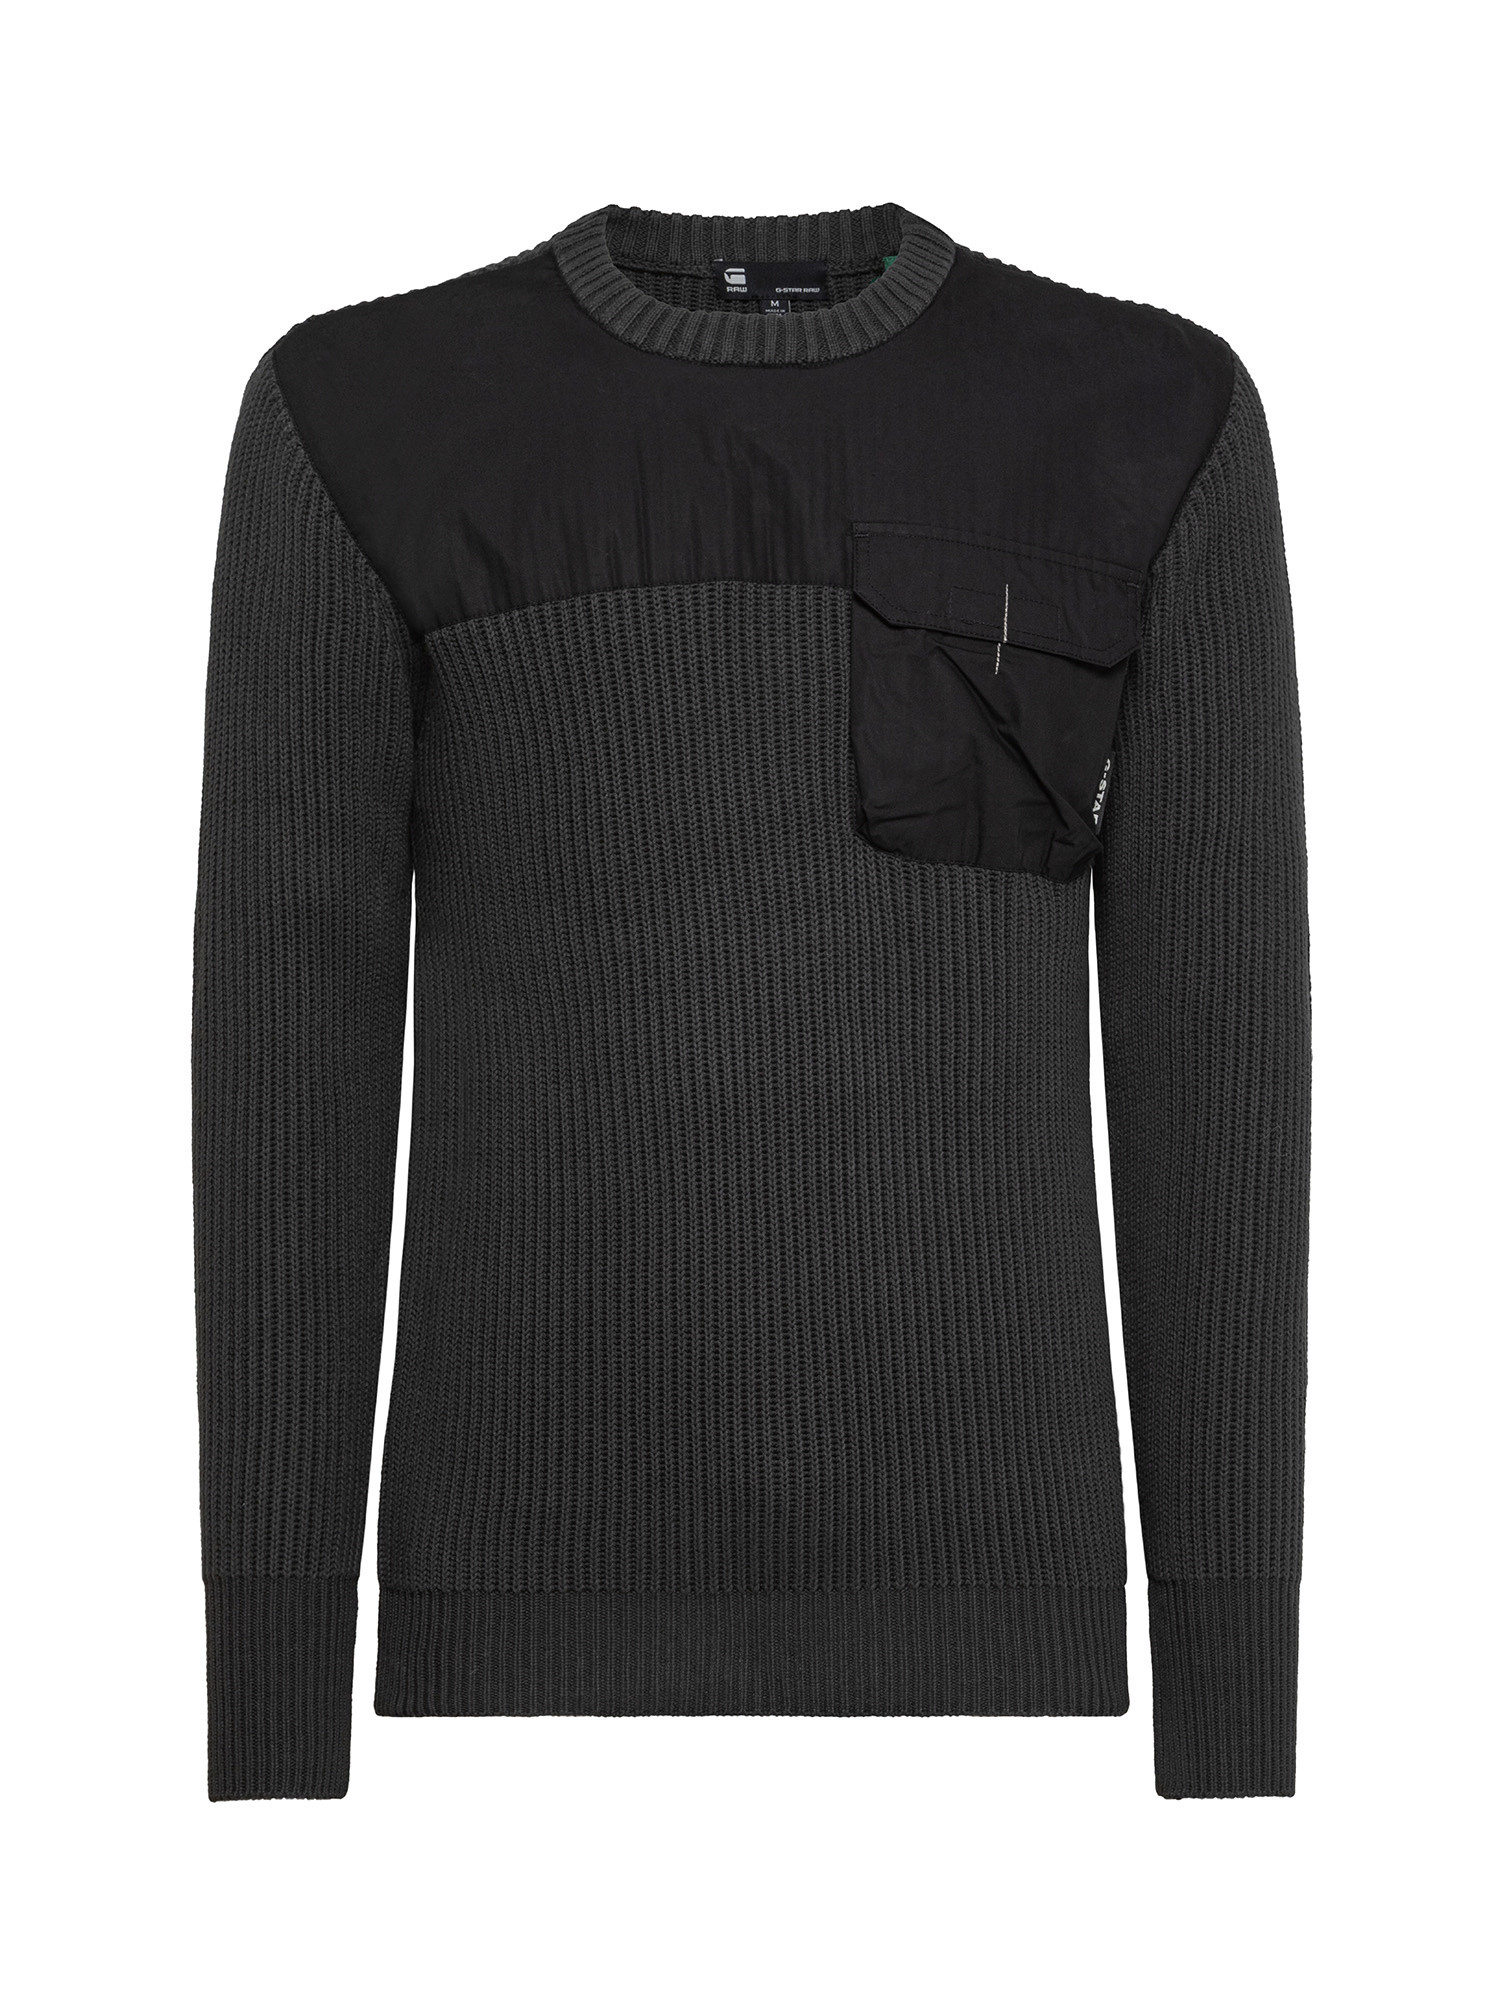 G-Star - Sweater with pocket, Anthracite, large image number 0